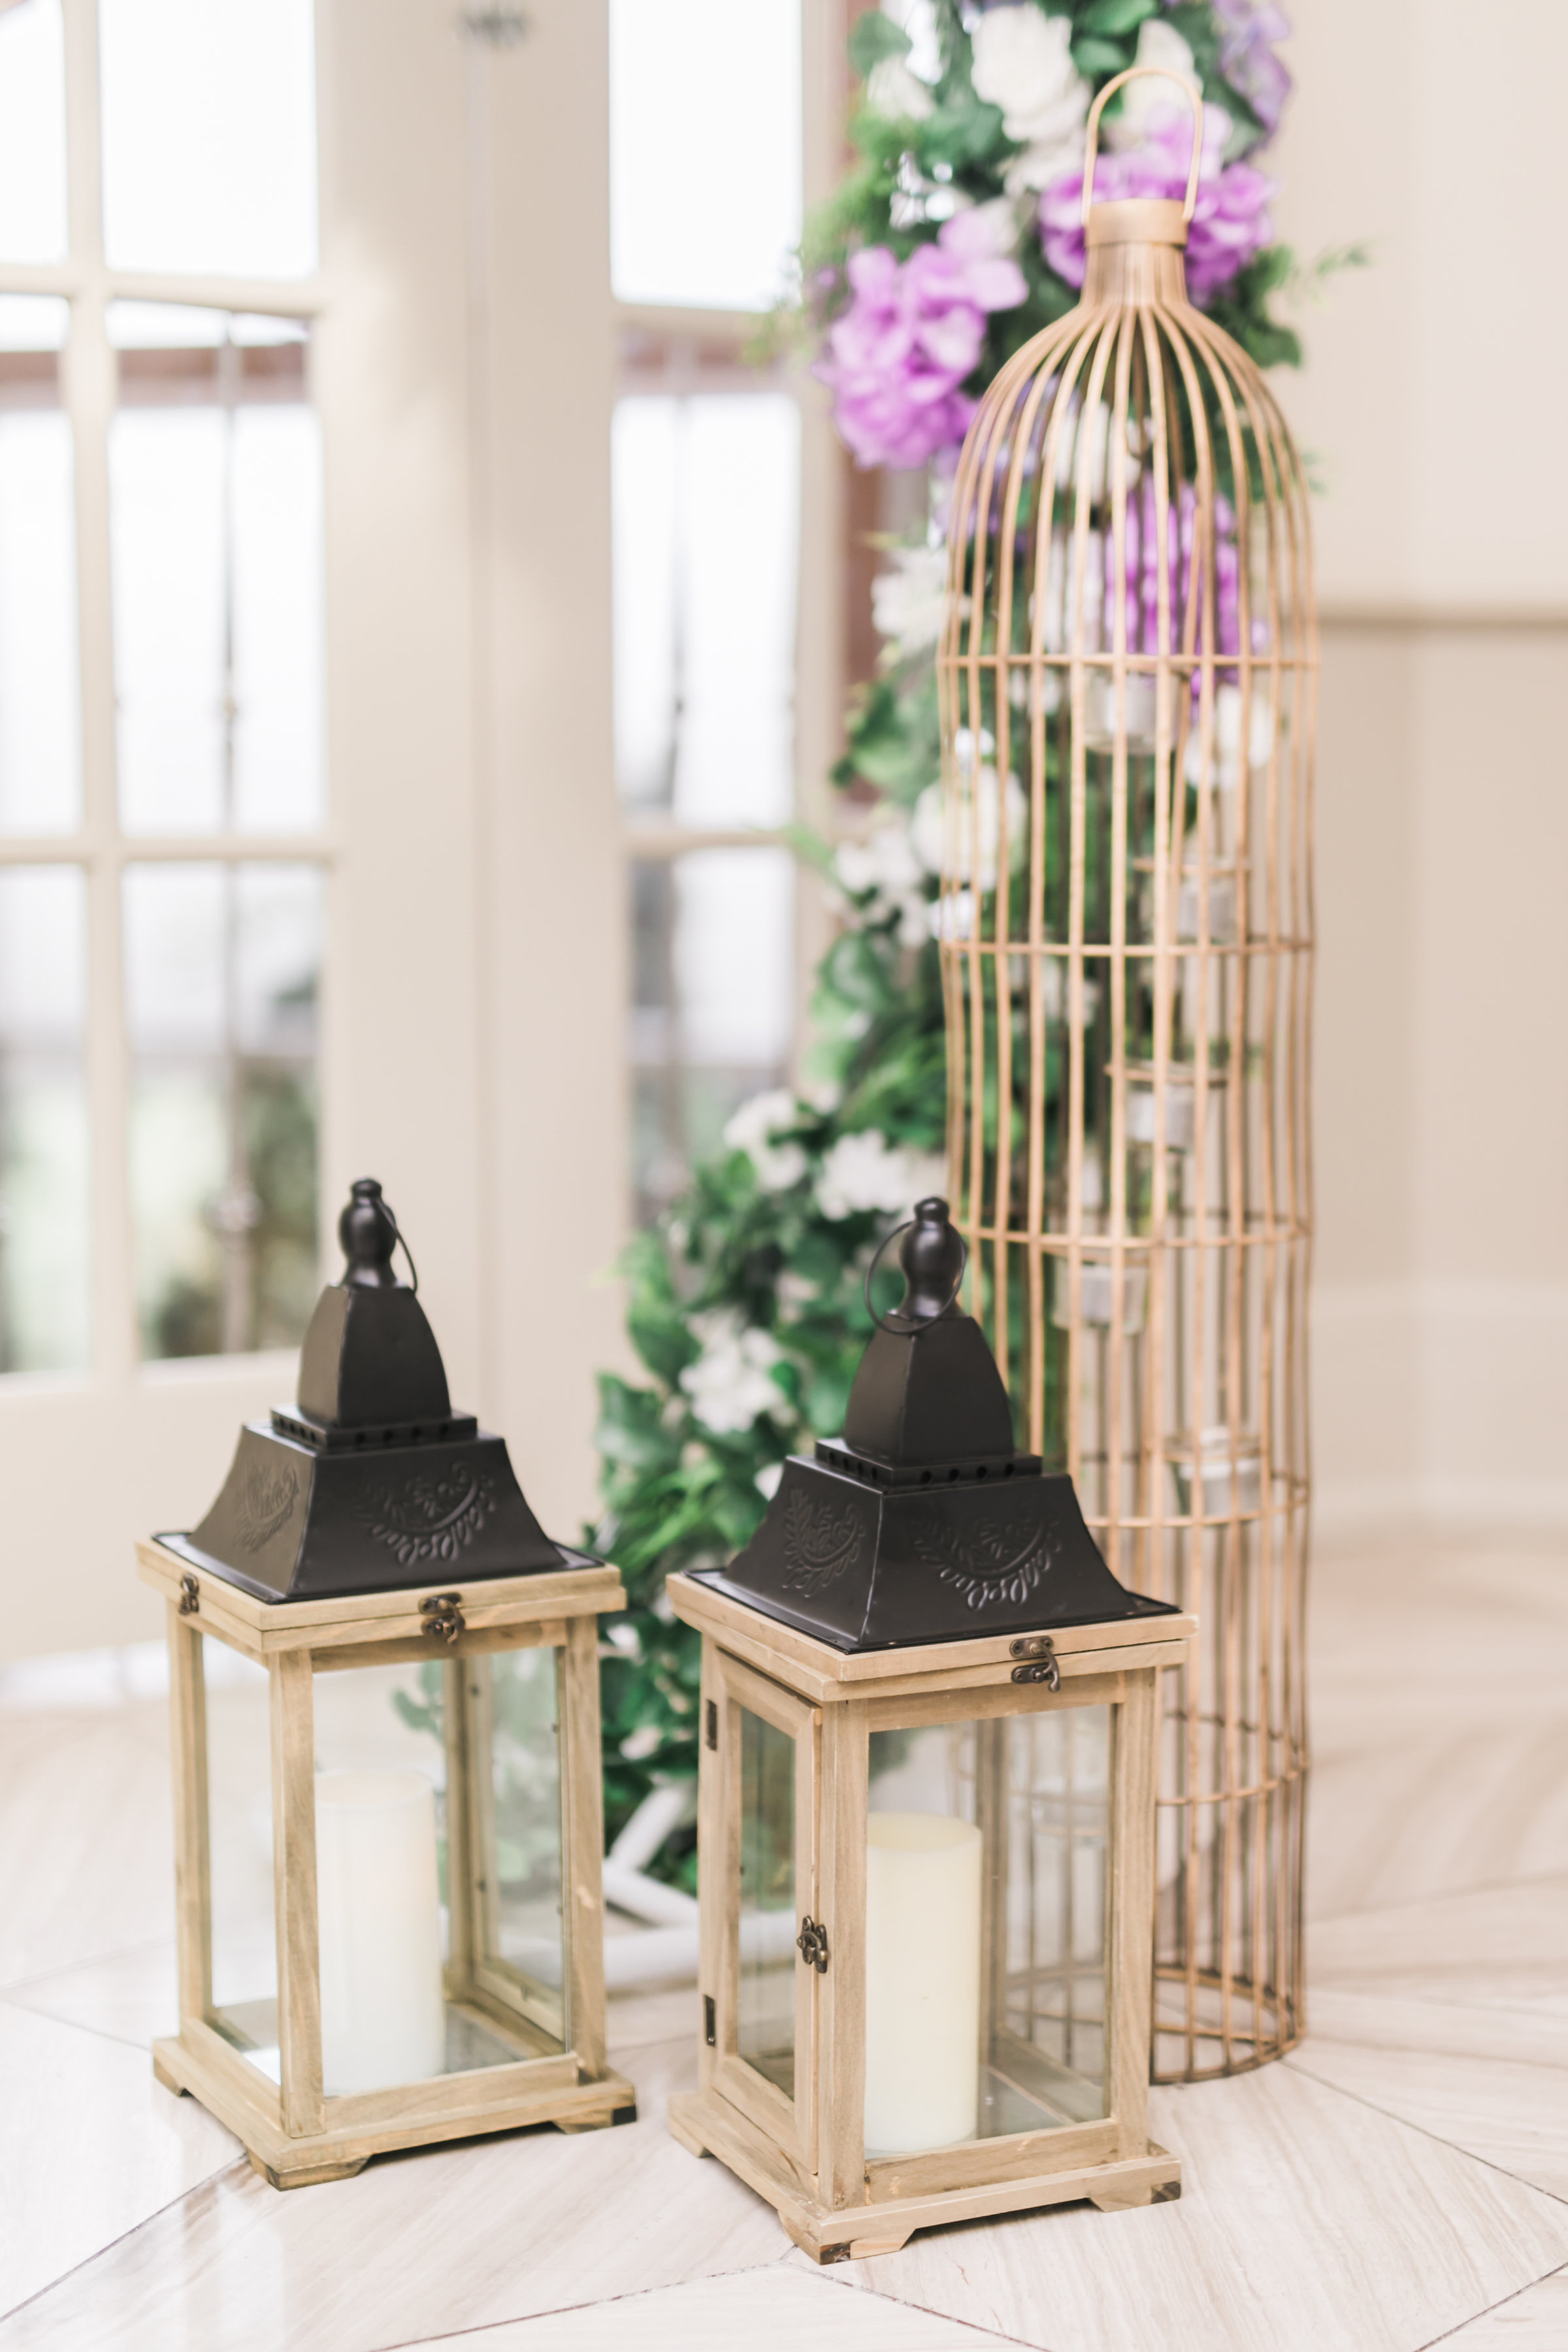 Rustic wood lantern and gold birdcage beside ceremony arch. Toronto wedding flowers and decor at Fontana Primavera by Secrets Floral.